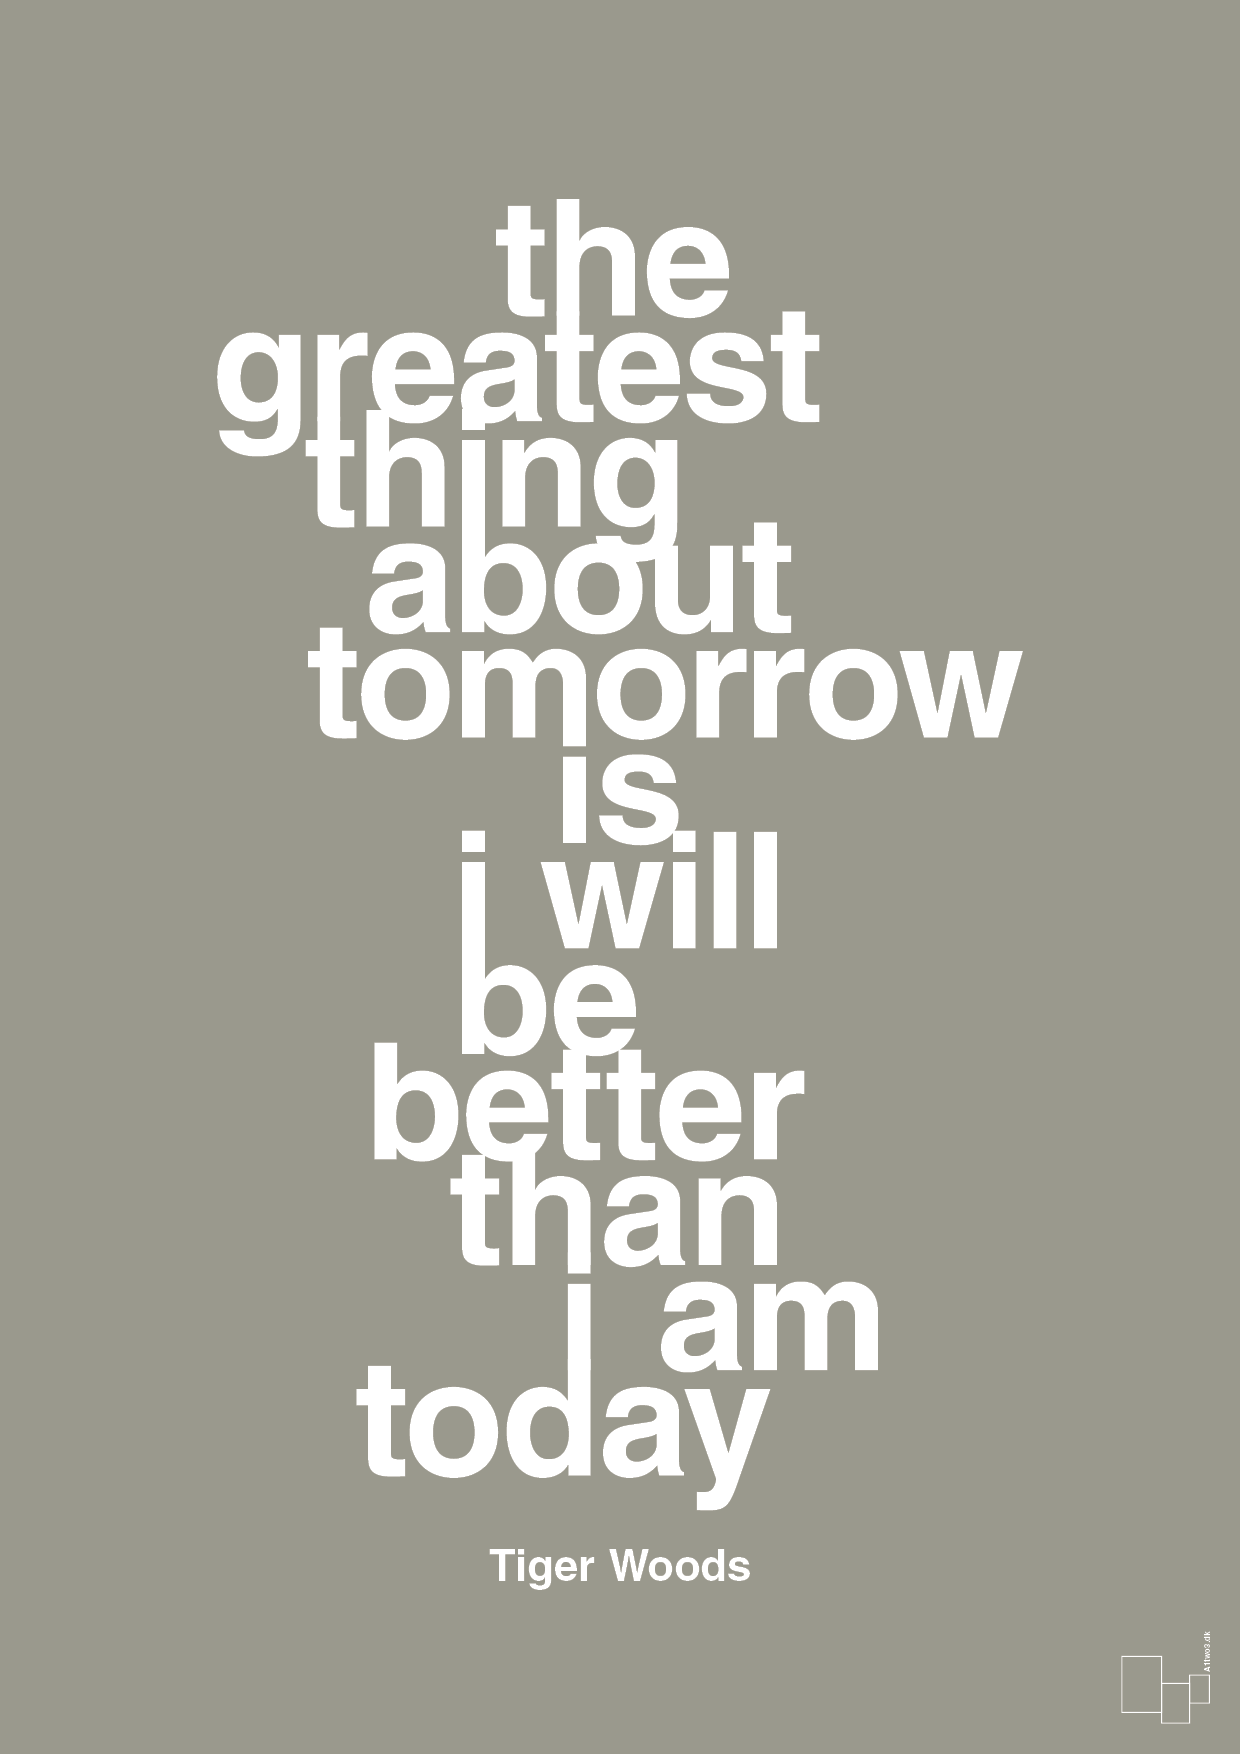 the greatest thing about tomorrow is i will be better than i am today - Plakat med Citater i Battleship Gray